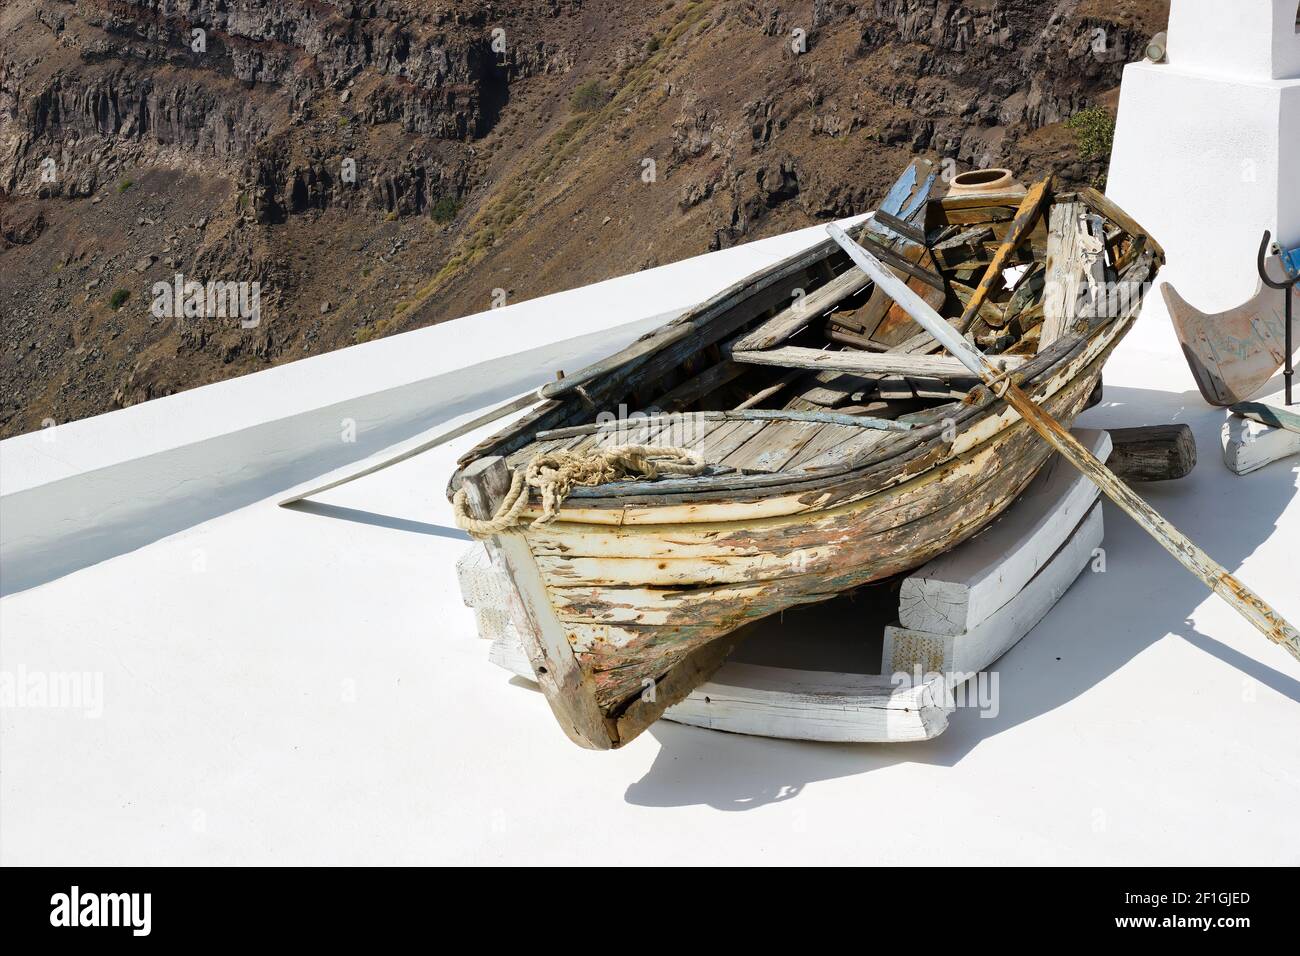 Santorini, Greece: A wrecked Boat on a roof at Firostefani near Fira on a greek island named Santorini. In the background is Skaros Rock mountain of I Stock Photo